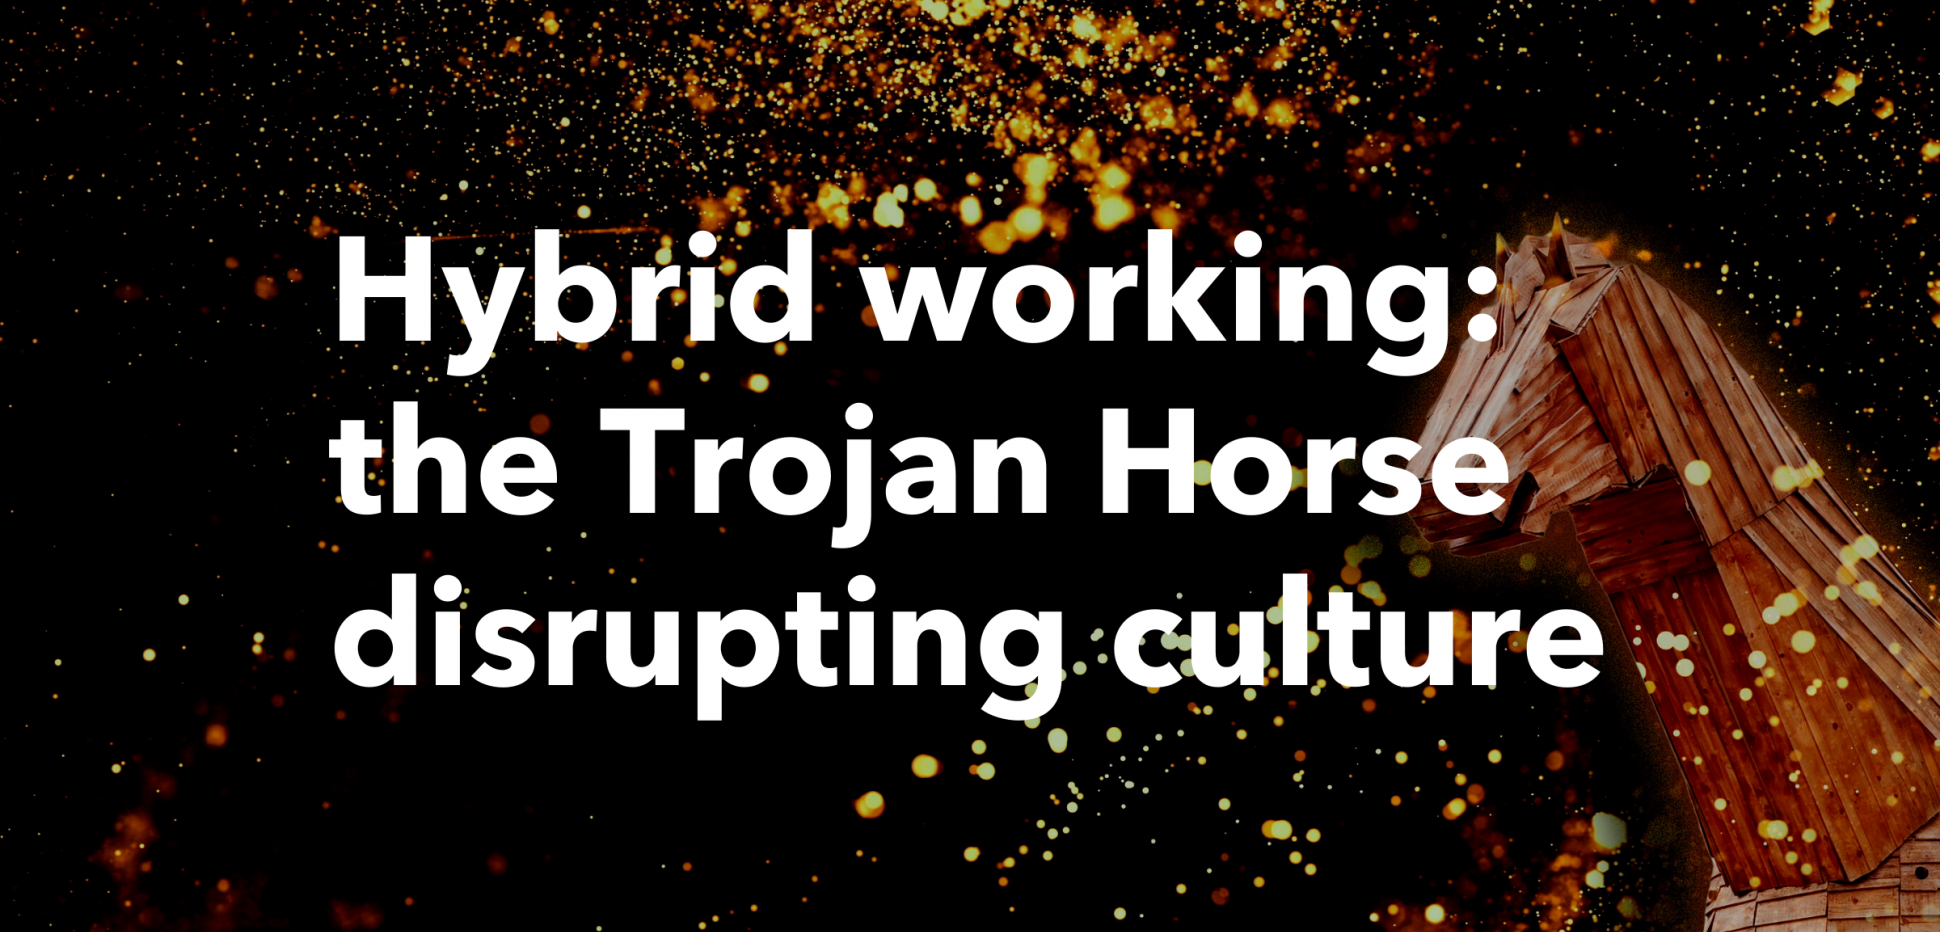 Hybrid_working_the_Trojan_Horse_disrupting_culture-2.png